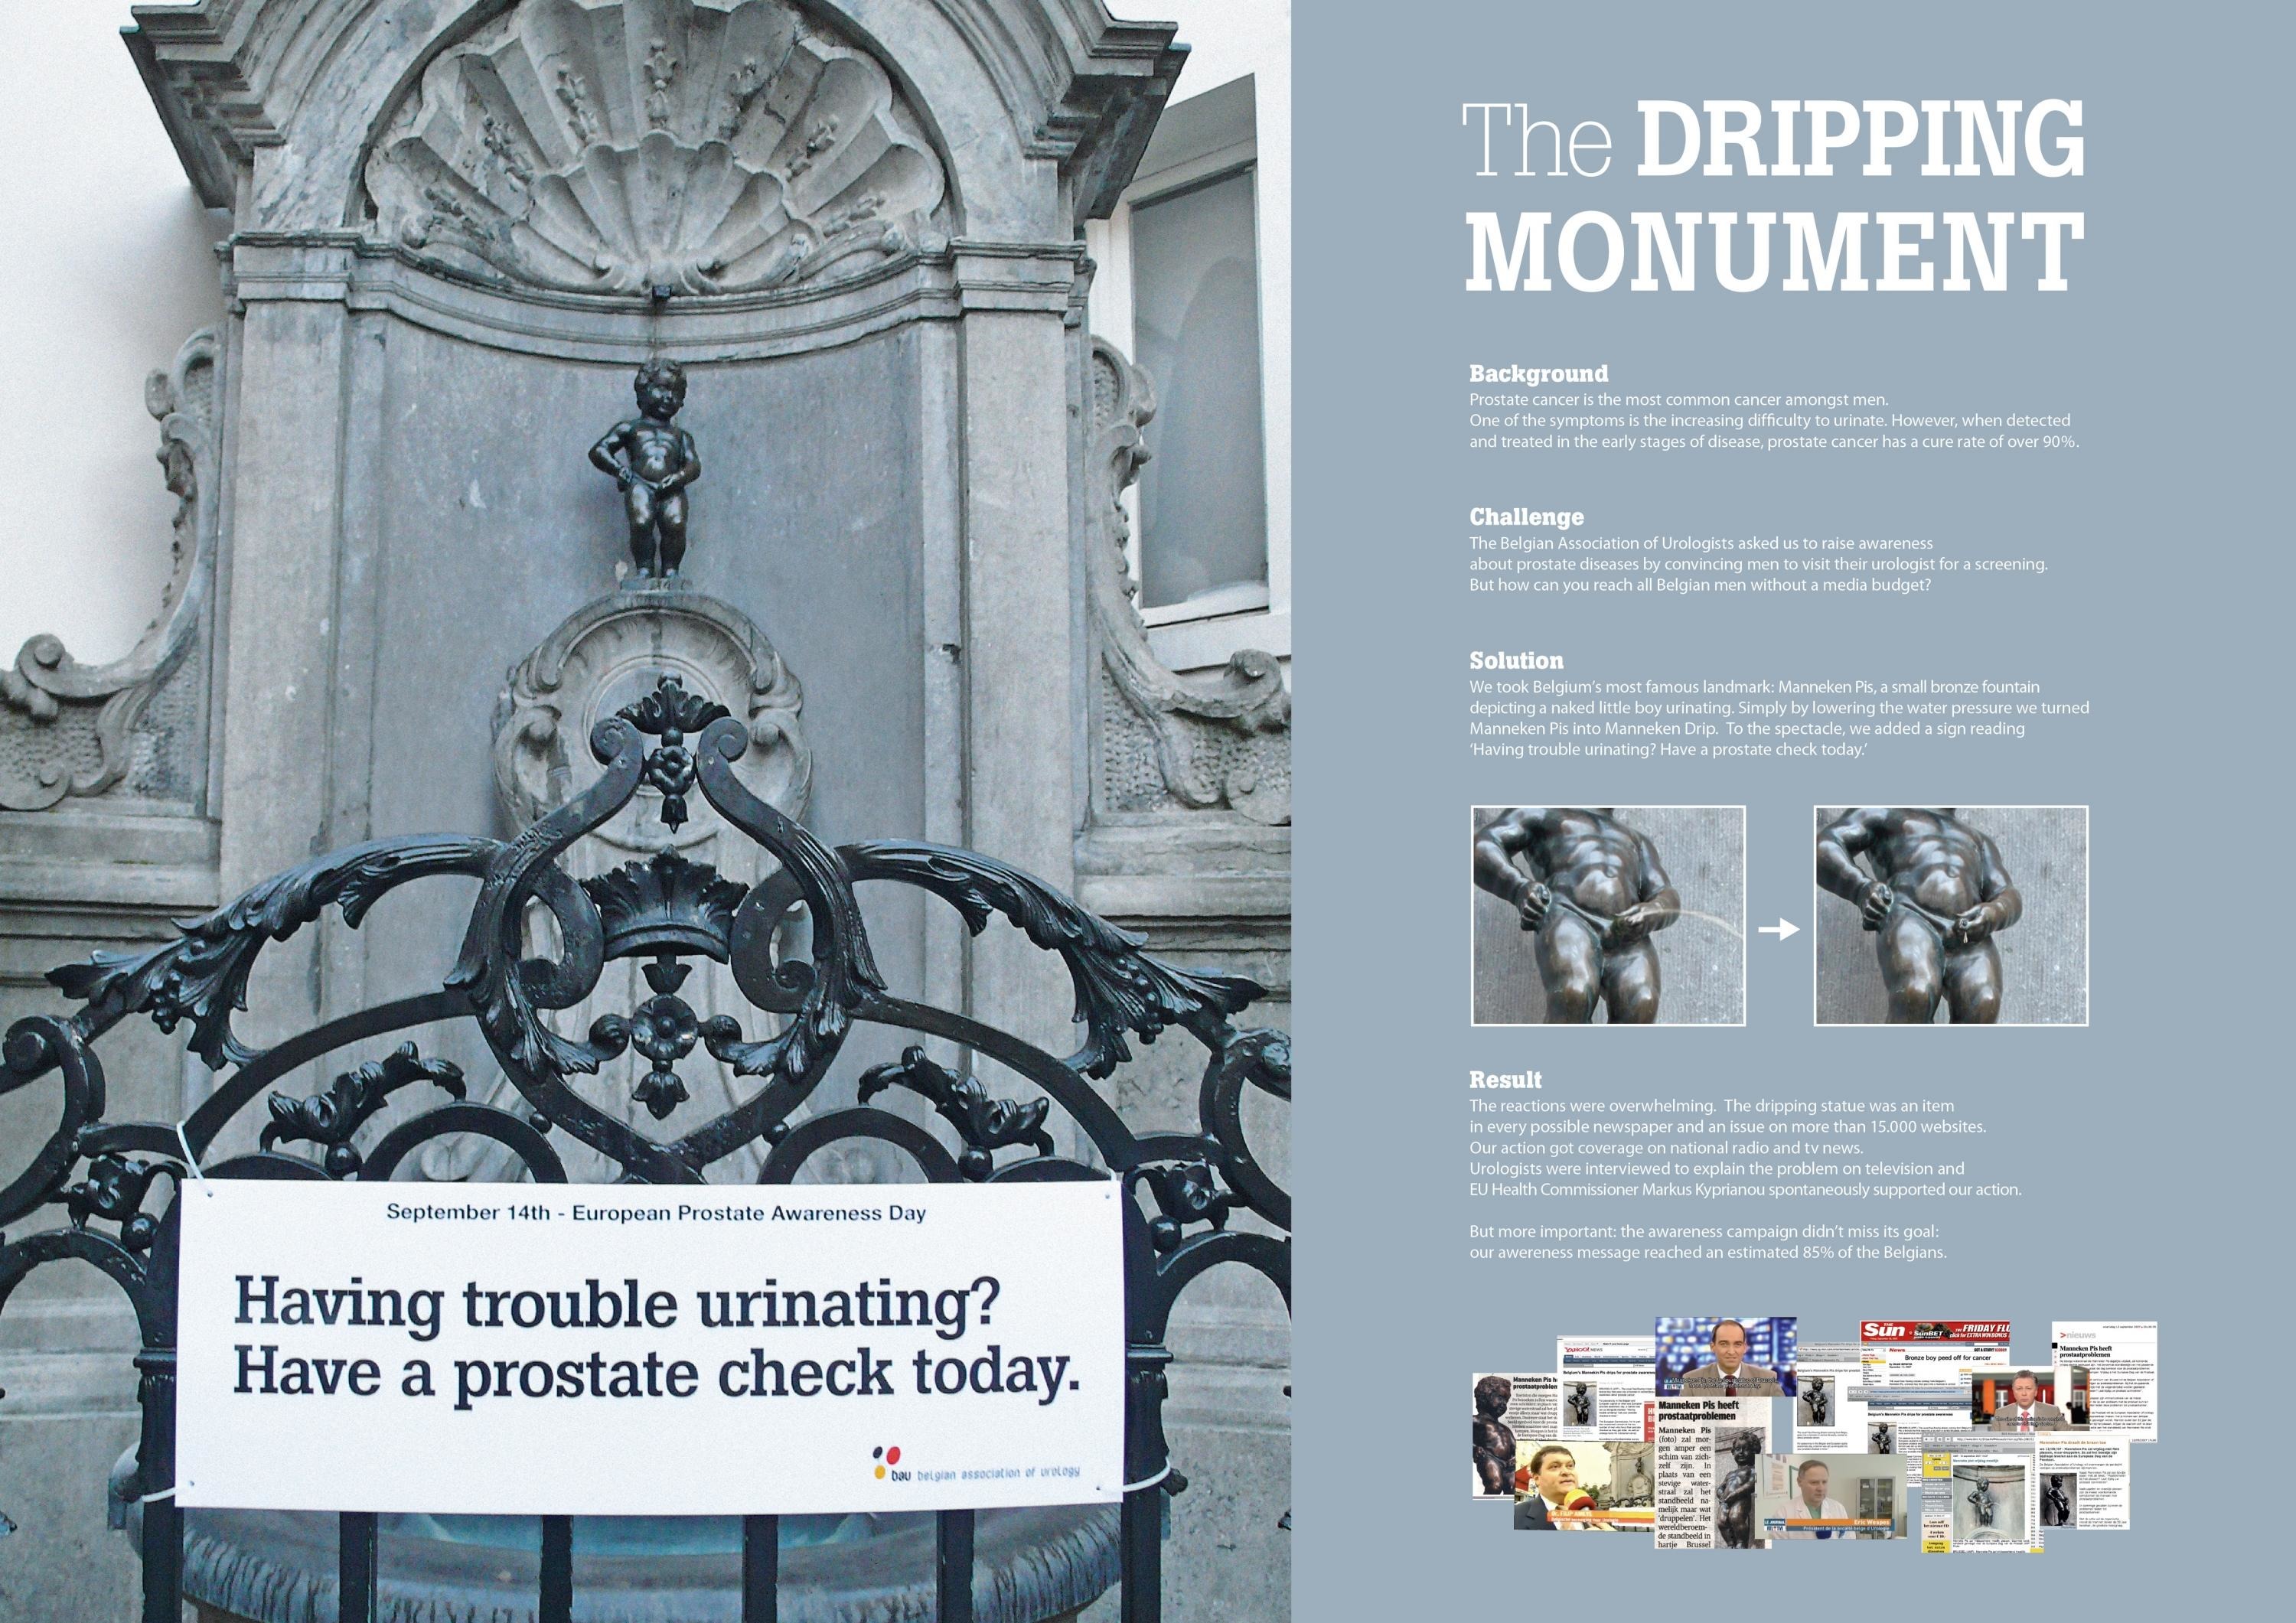 DRIPPING MONUMENT